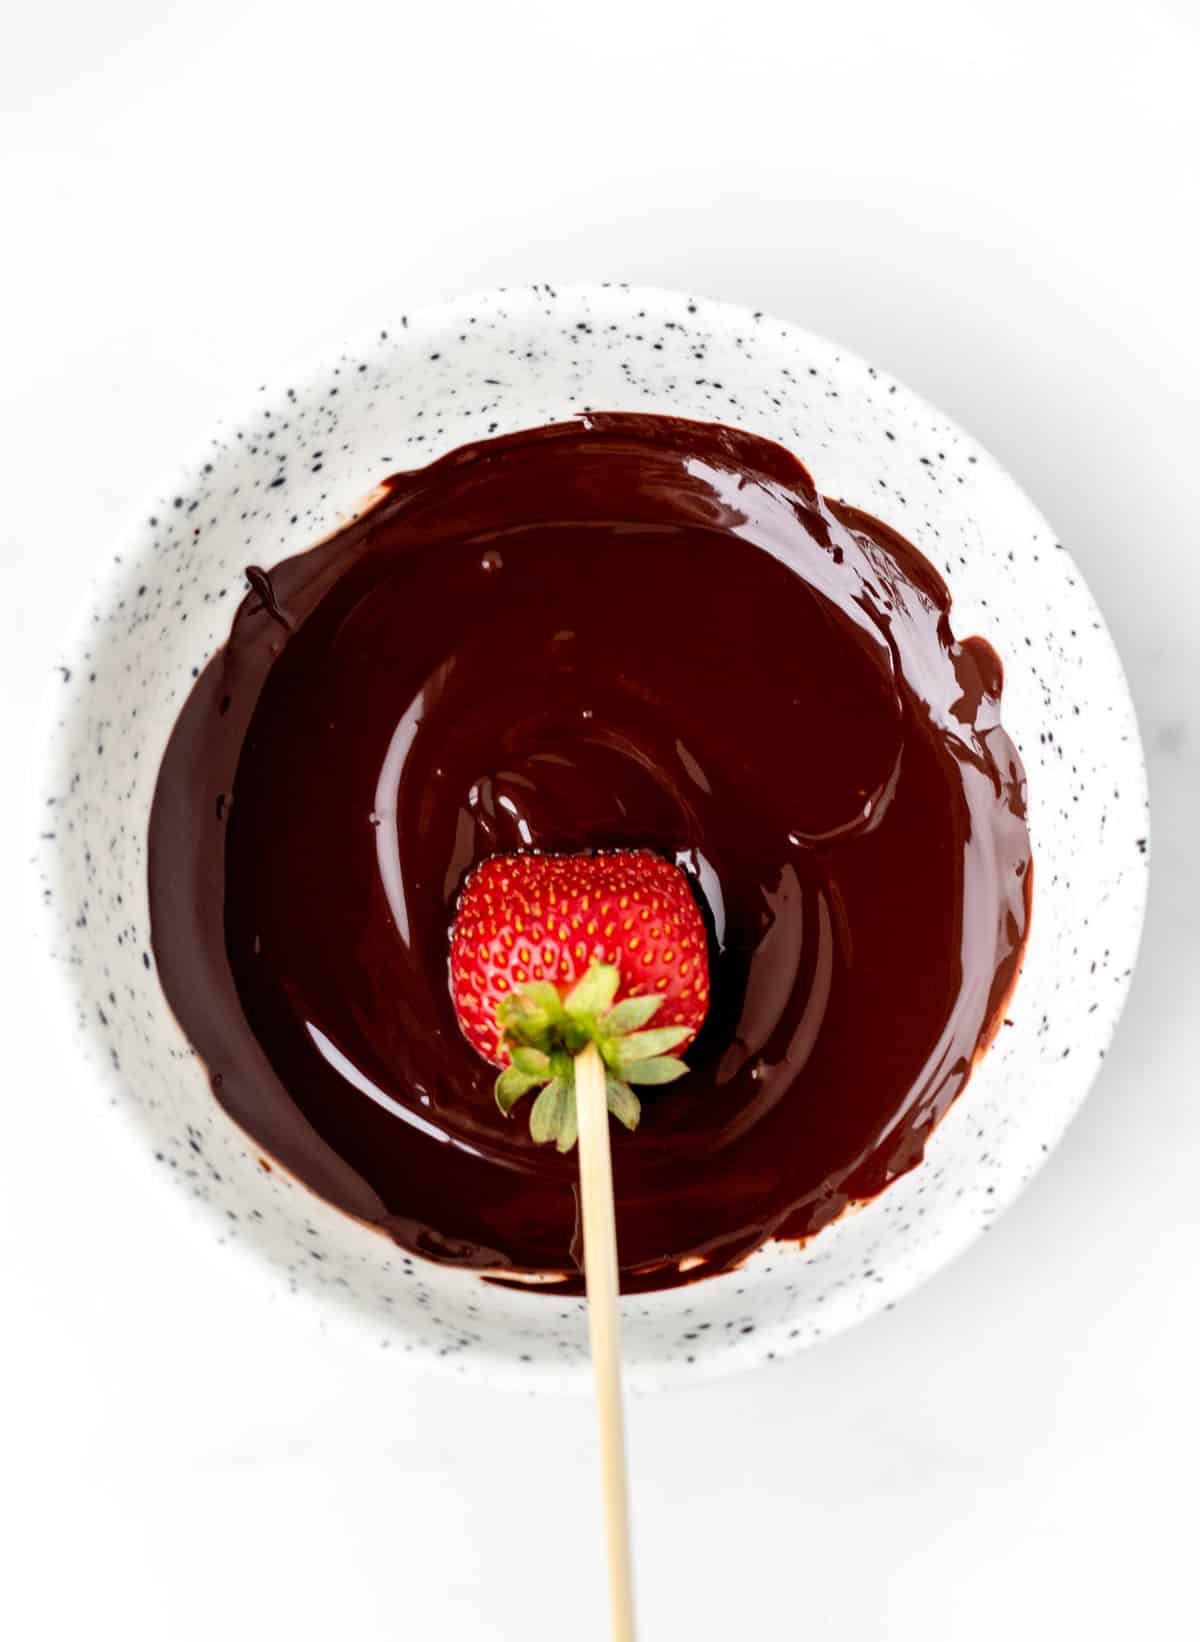 A strawberry on a wooden skewer being dipped into a bowl of melted chocolate.